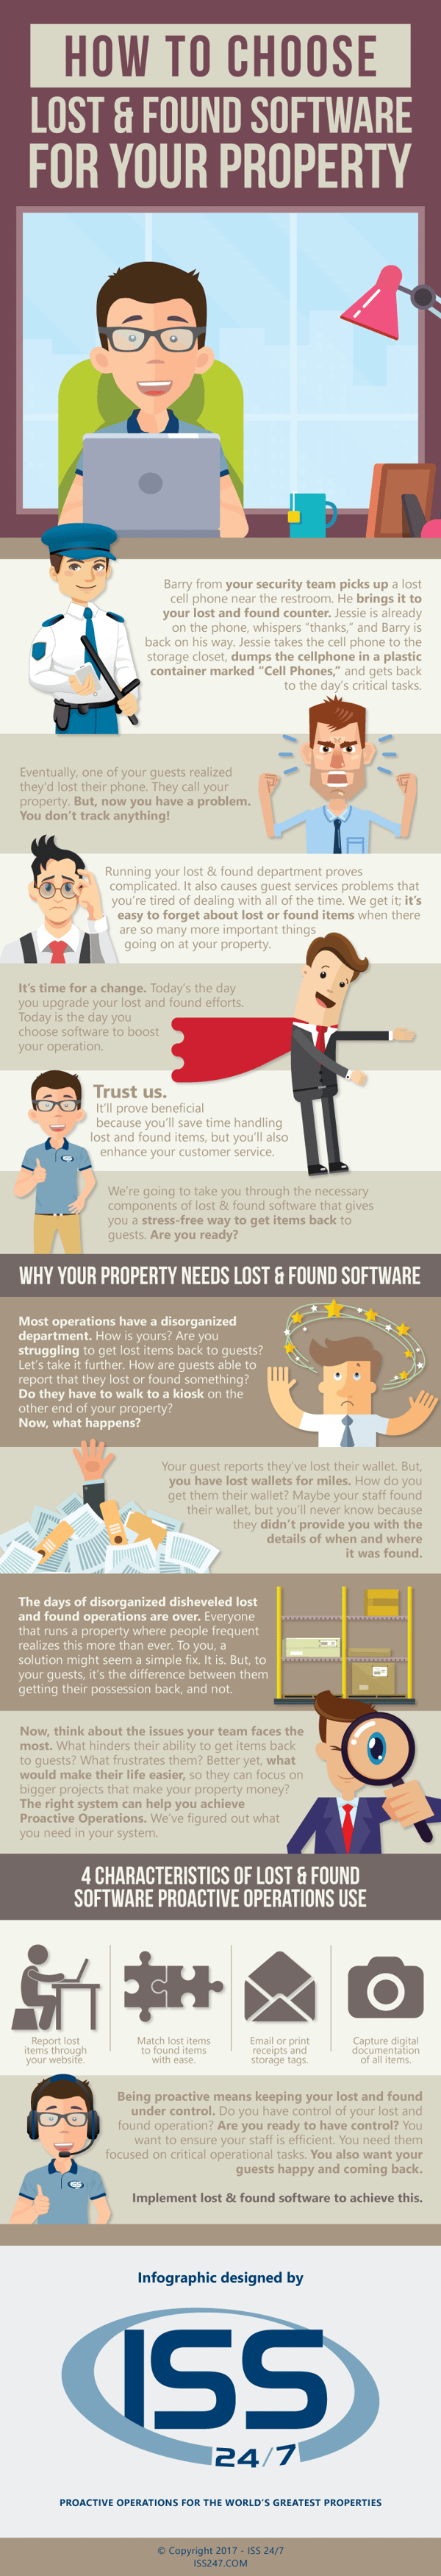 How to Choose Lost & Found Software for Your Property